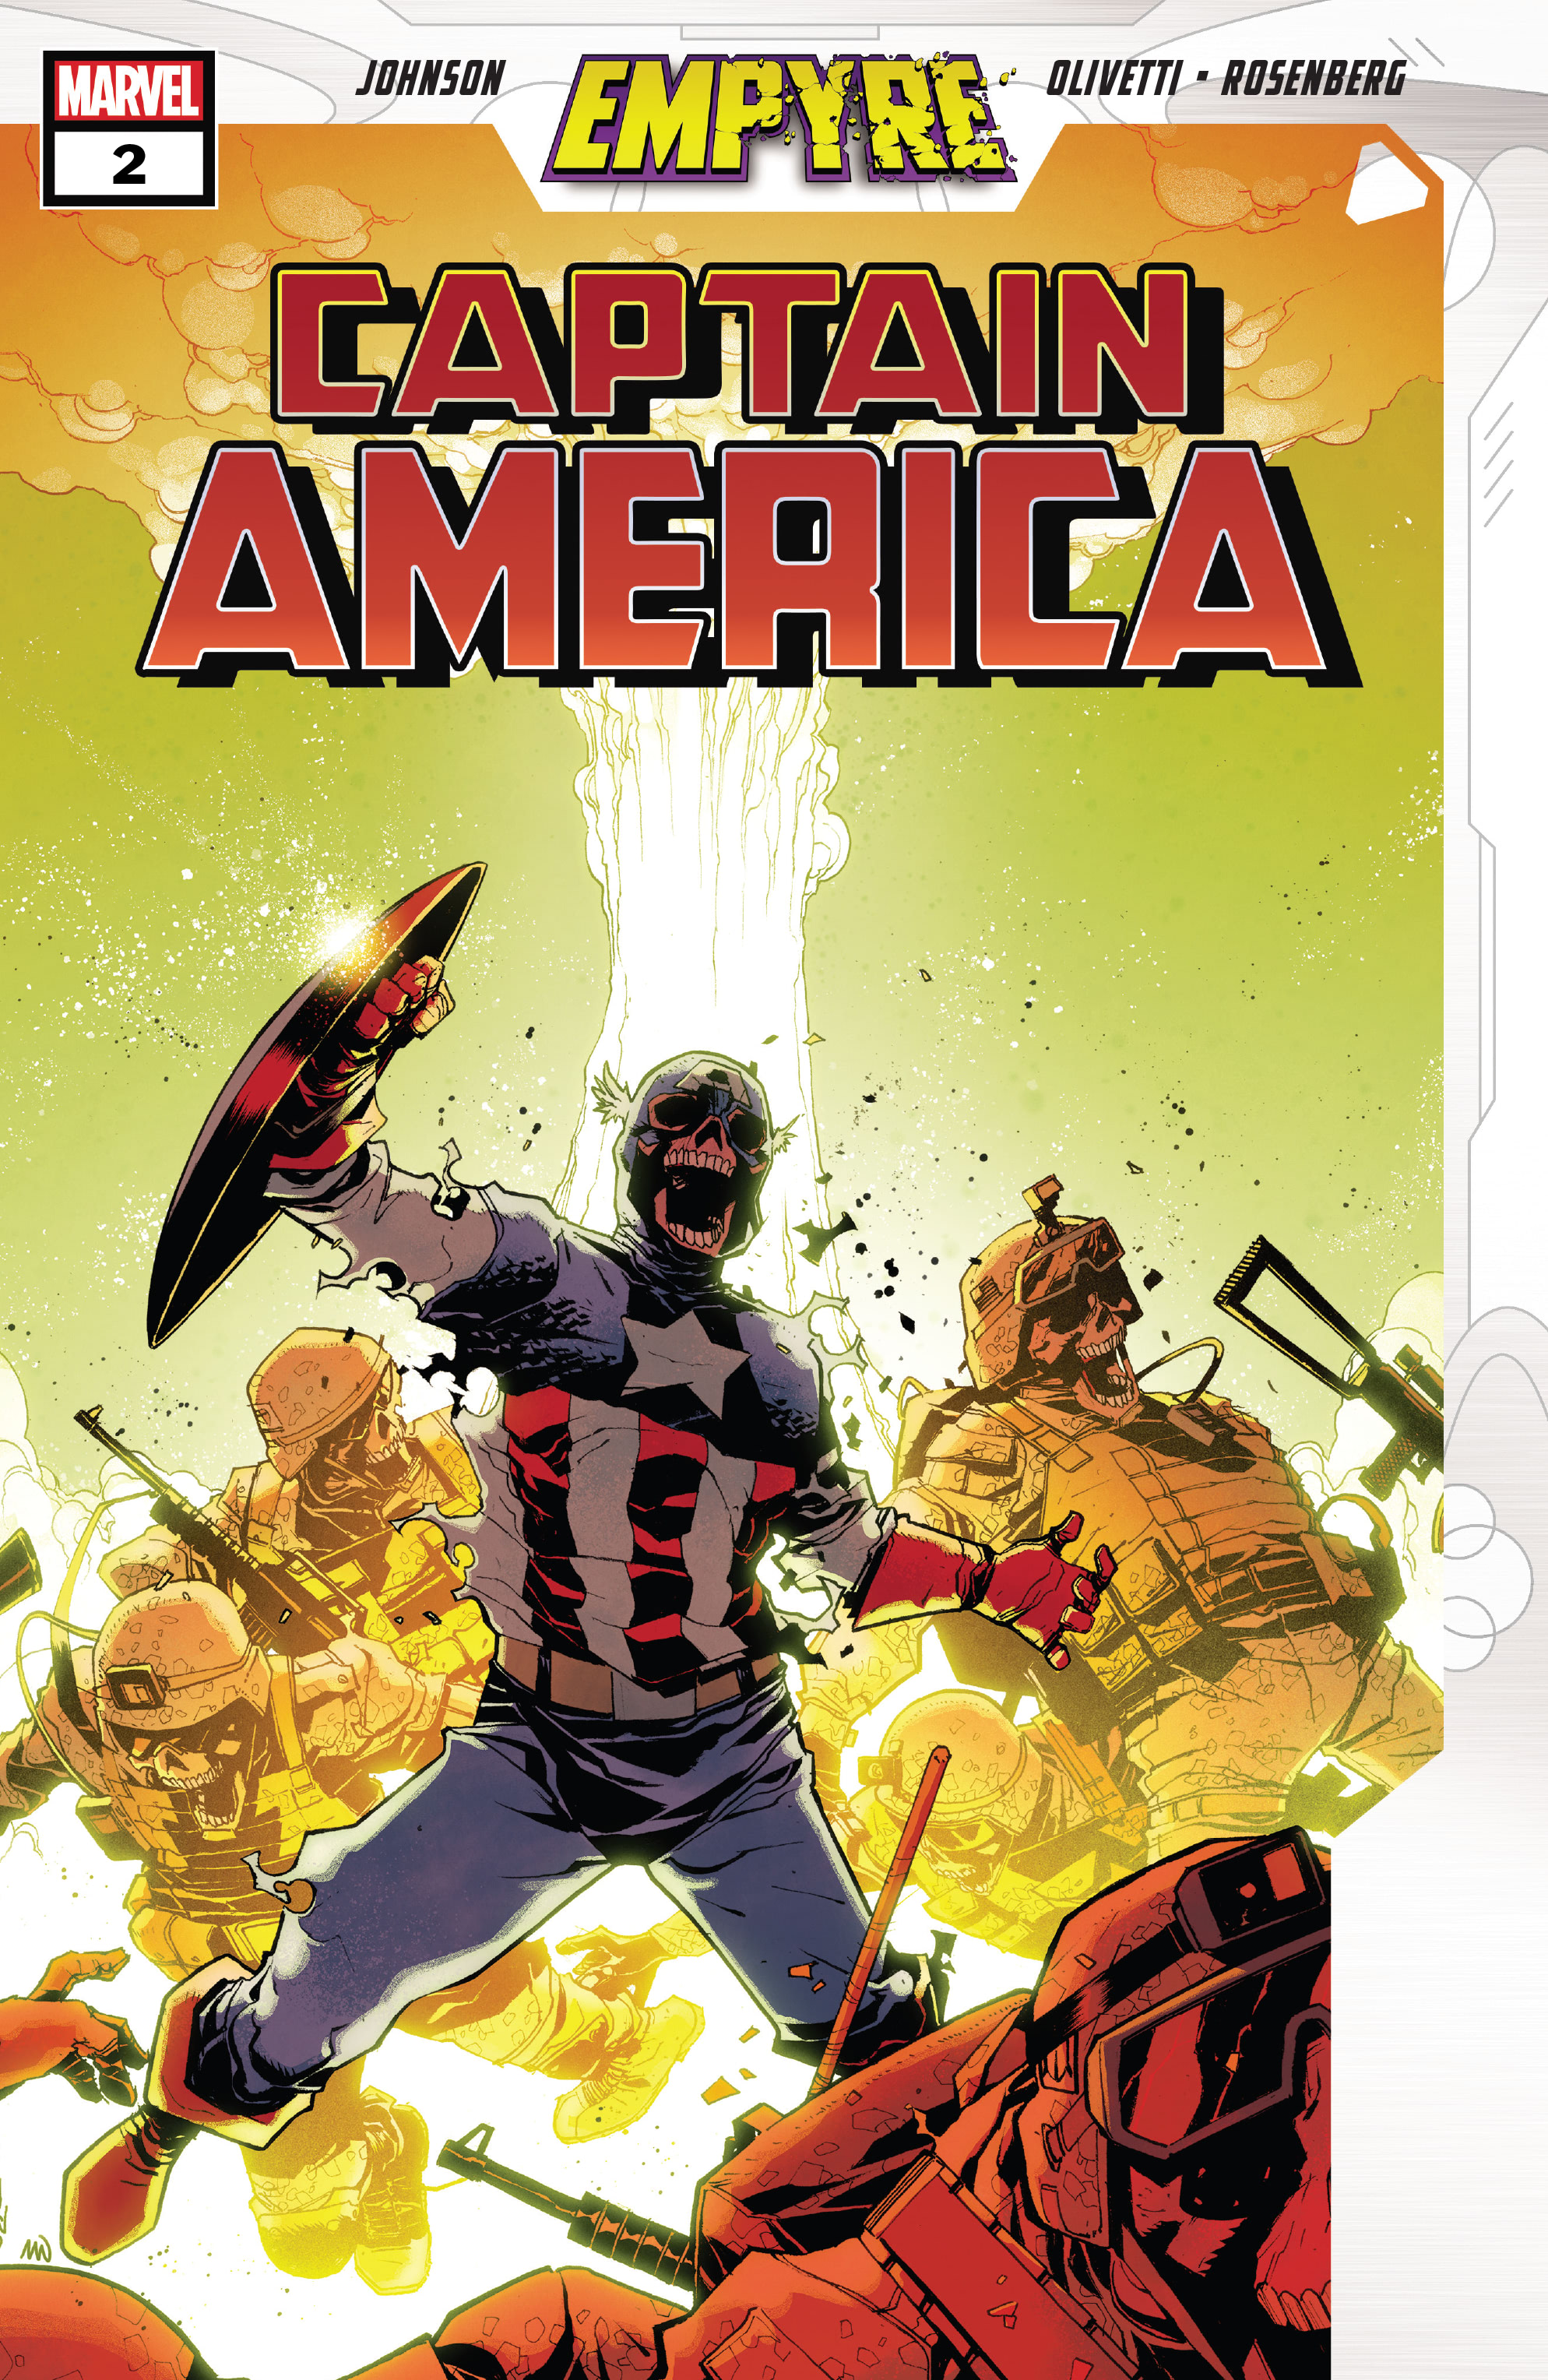 The cover of Empyre: Captain America #2. There are four figures falling towards the camera, all of them skeletons. The three in the background are wearing military combat uniforms. The skeleton at the front is dressed as Captain America with his shield raised in his right arm, jaw open. There is a mushroom explosion cloud in the background over a yellow-green background. The title 'CAPTAIN AMERICA' is written in red capitals over the mushroom cloud. 